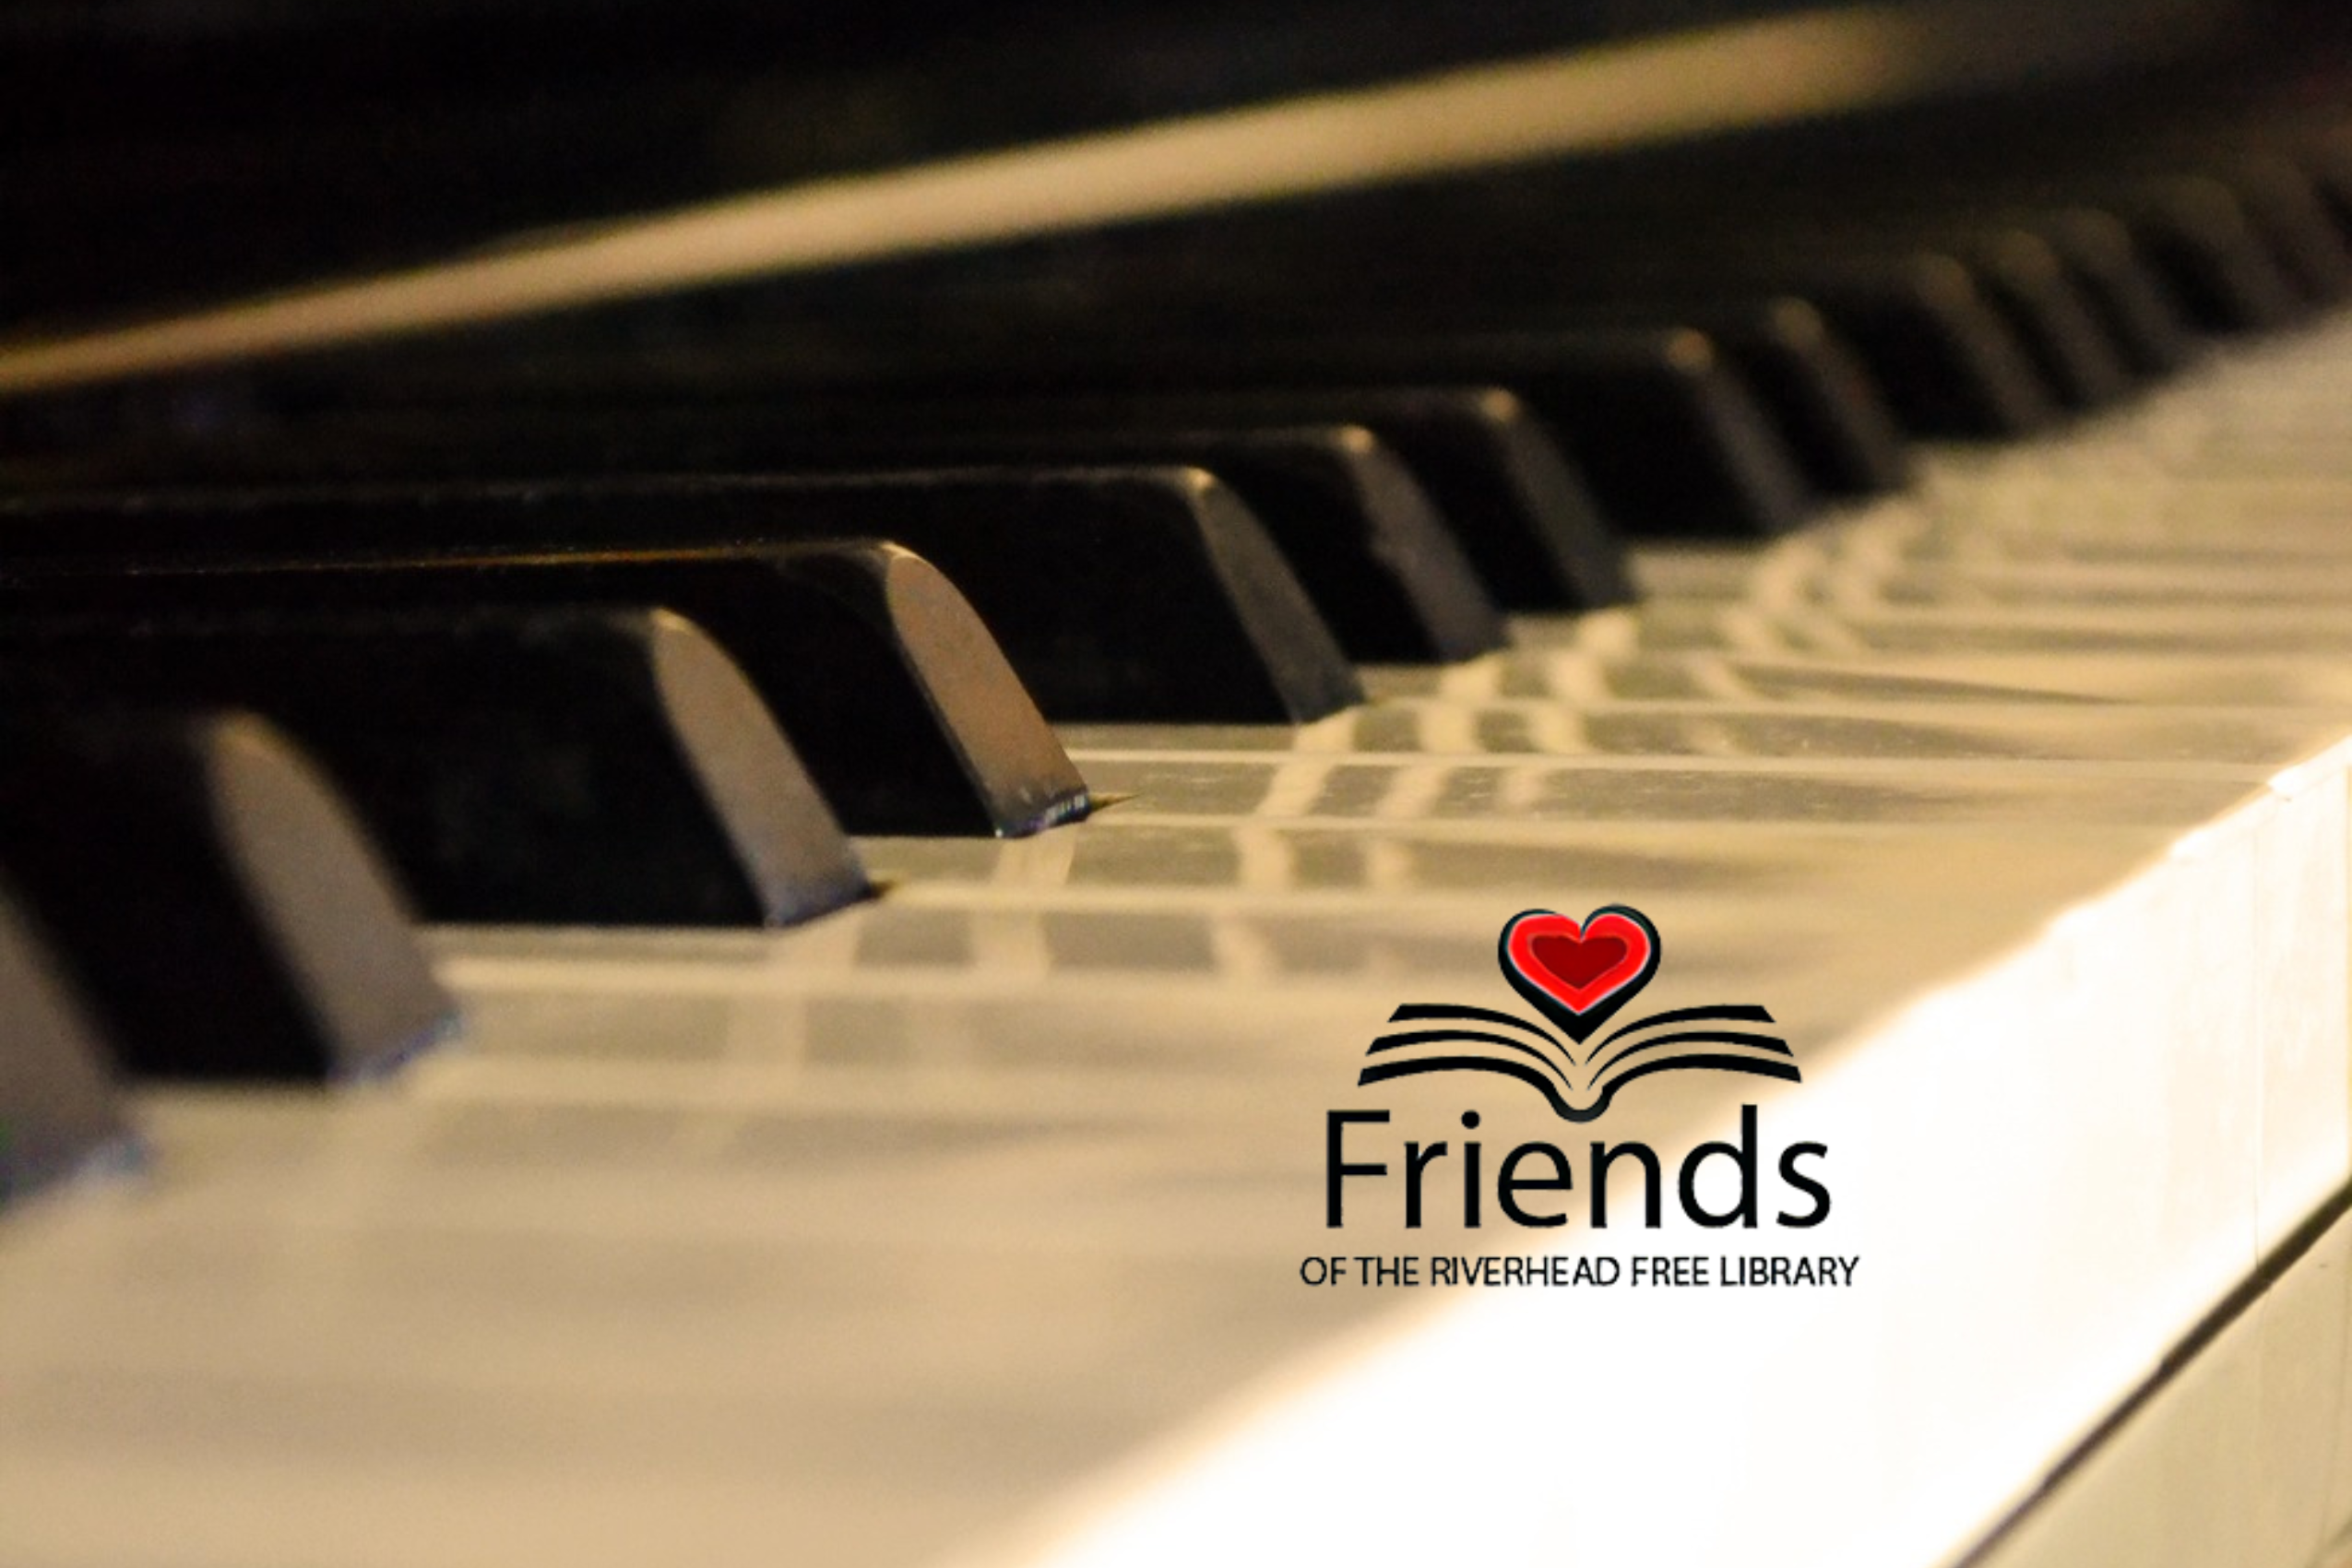 piano keyboard with friends logo